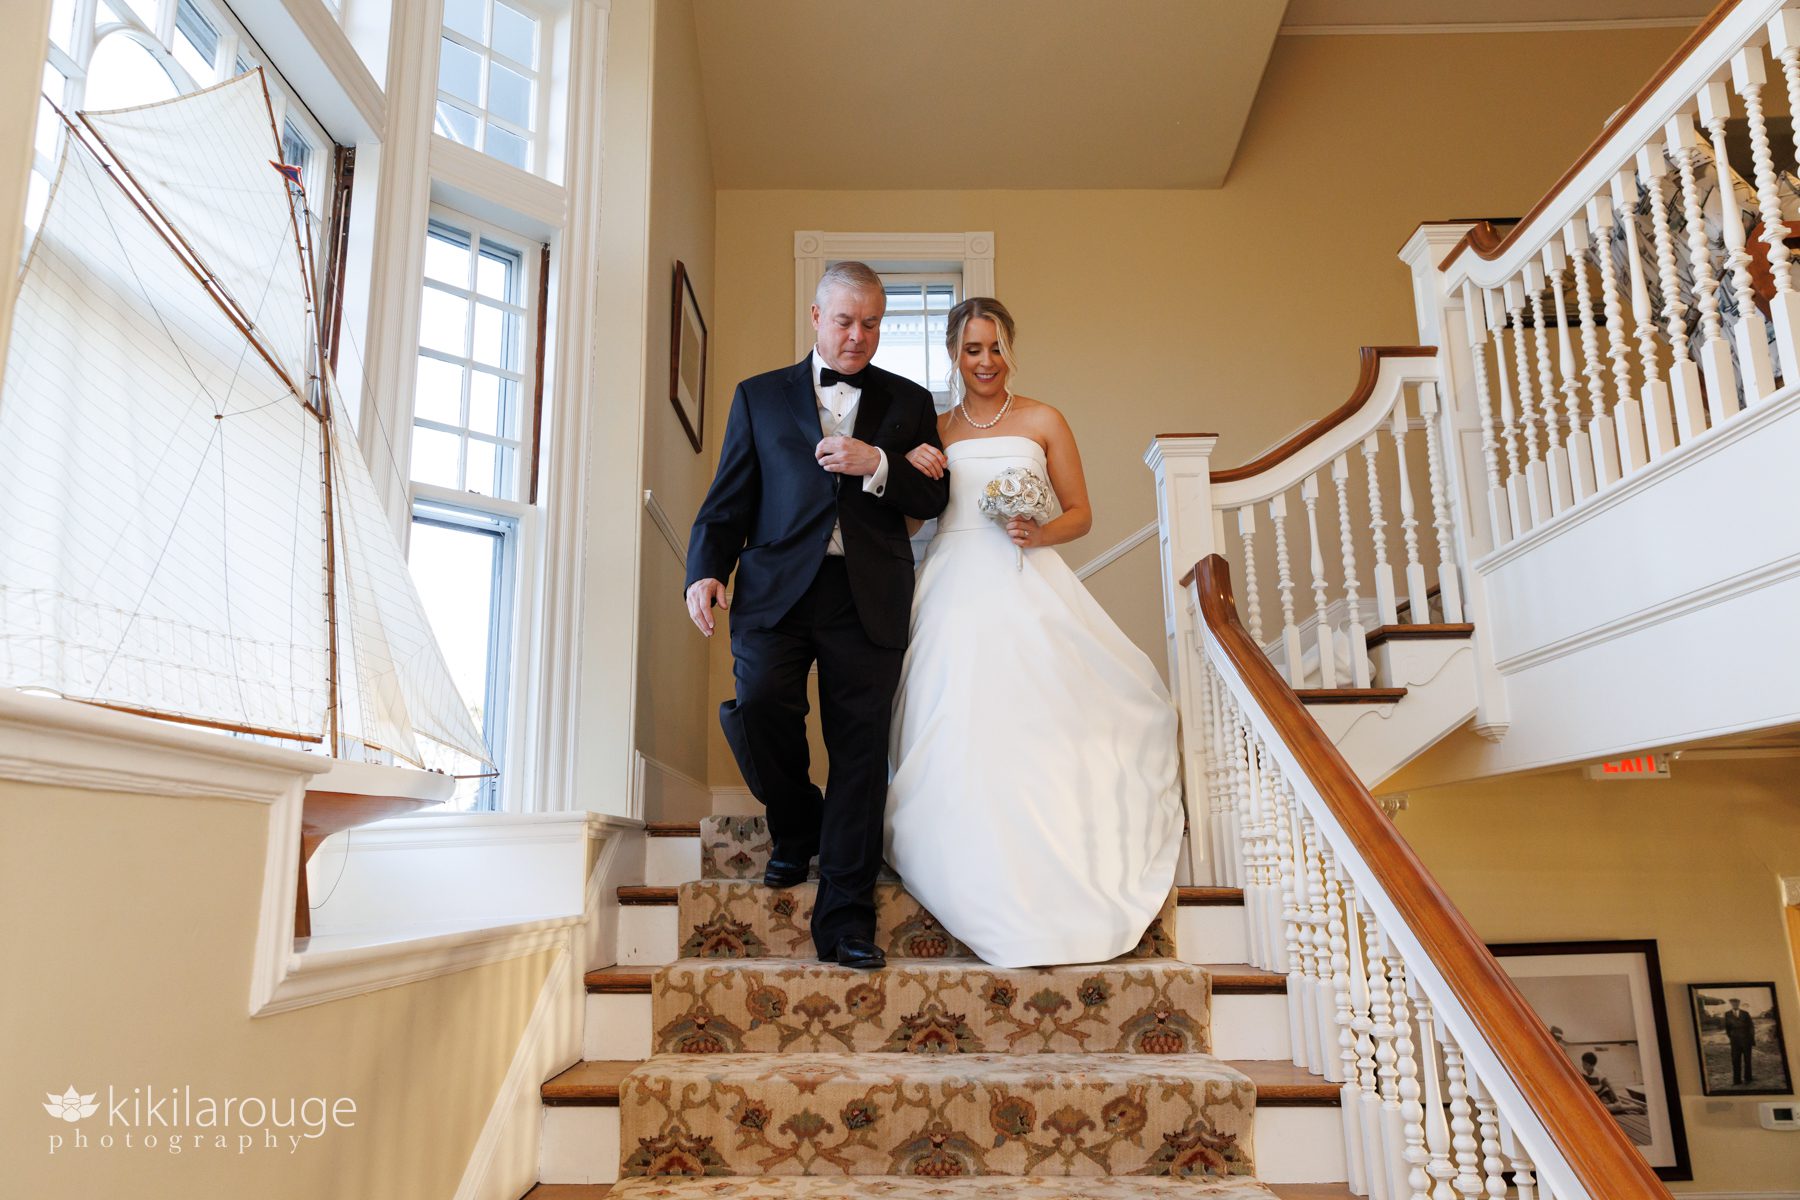 Father in tux walking bride down carpeted stairs at yacht club